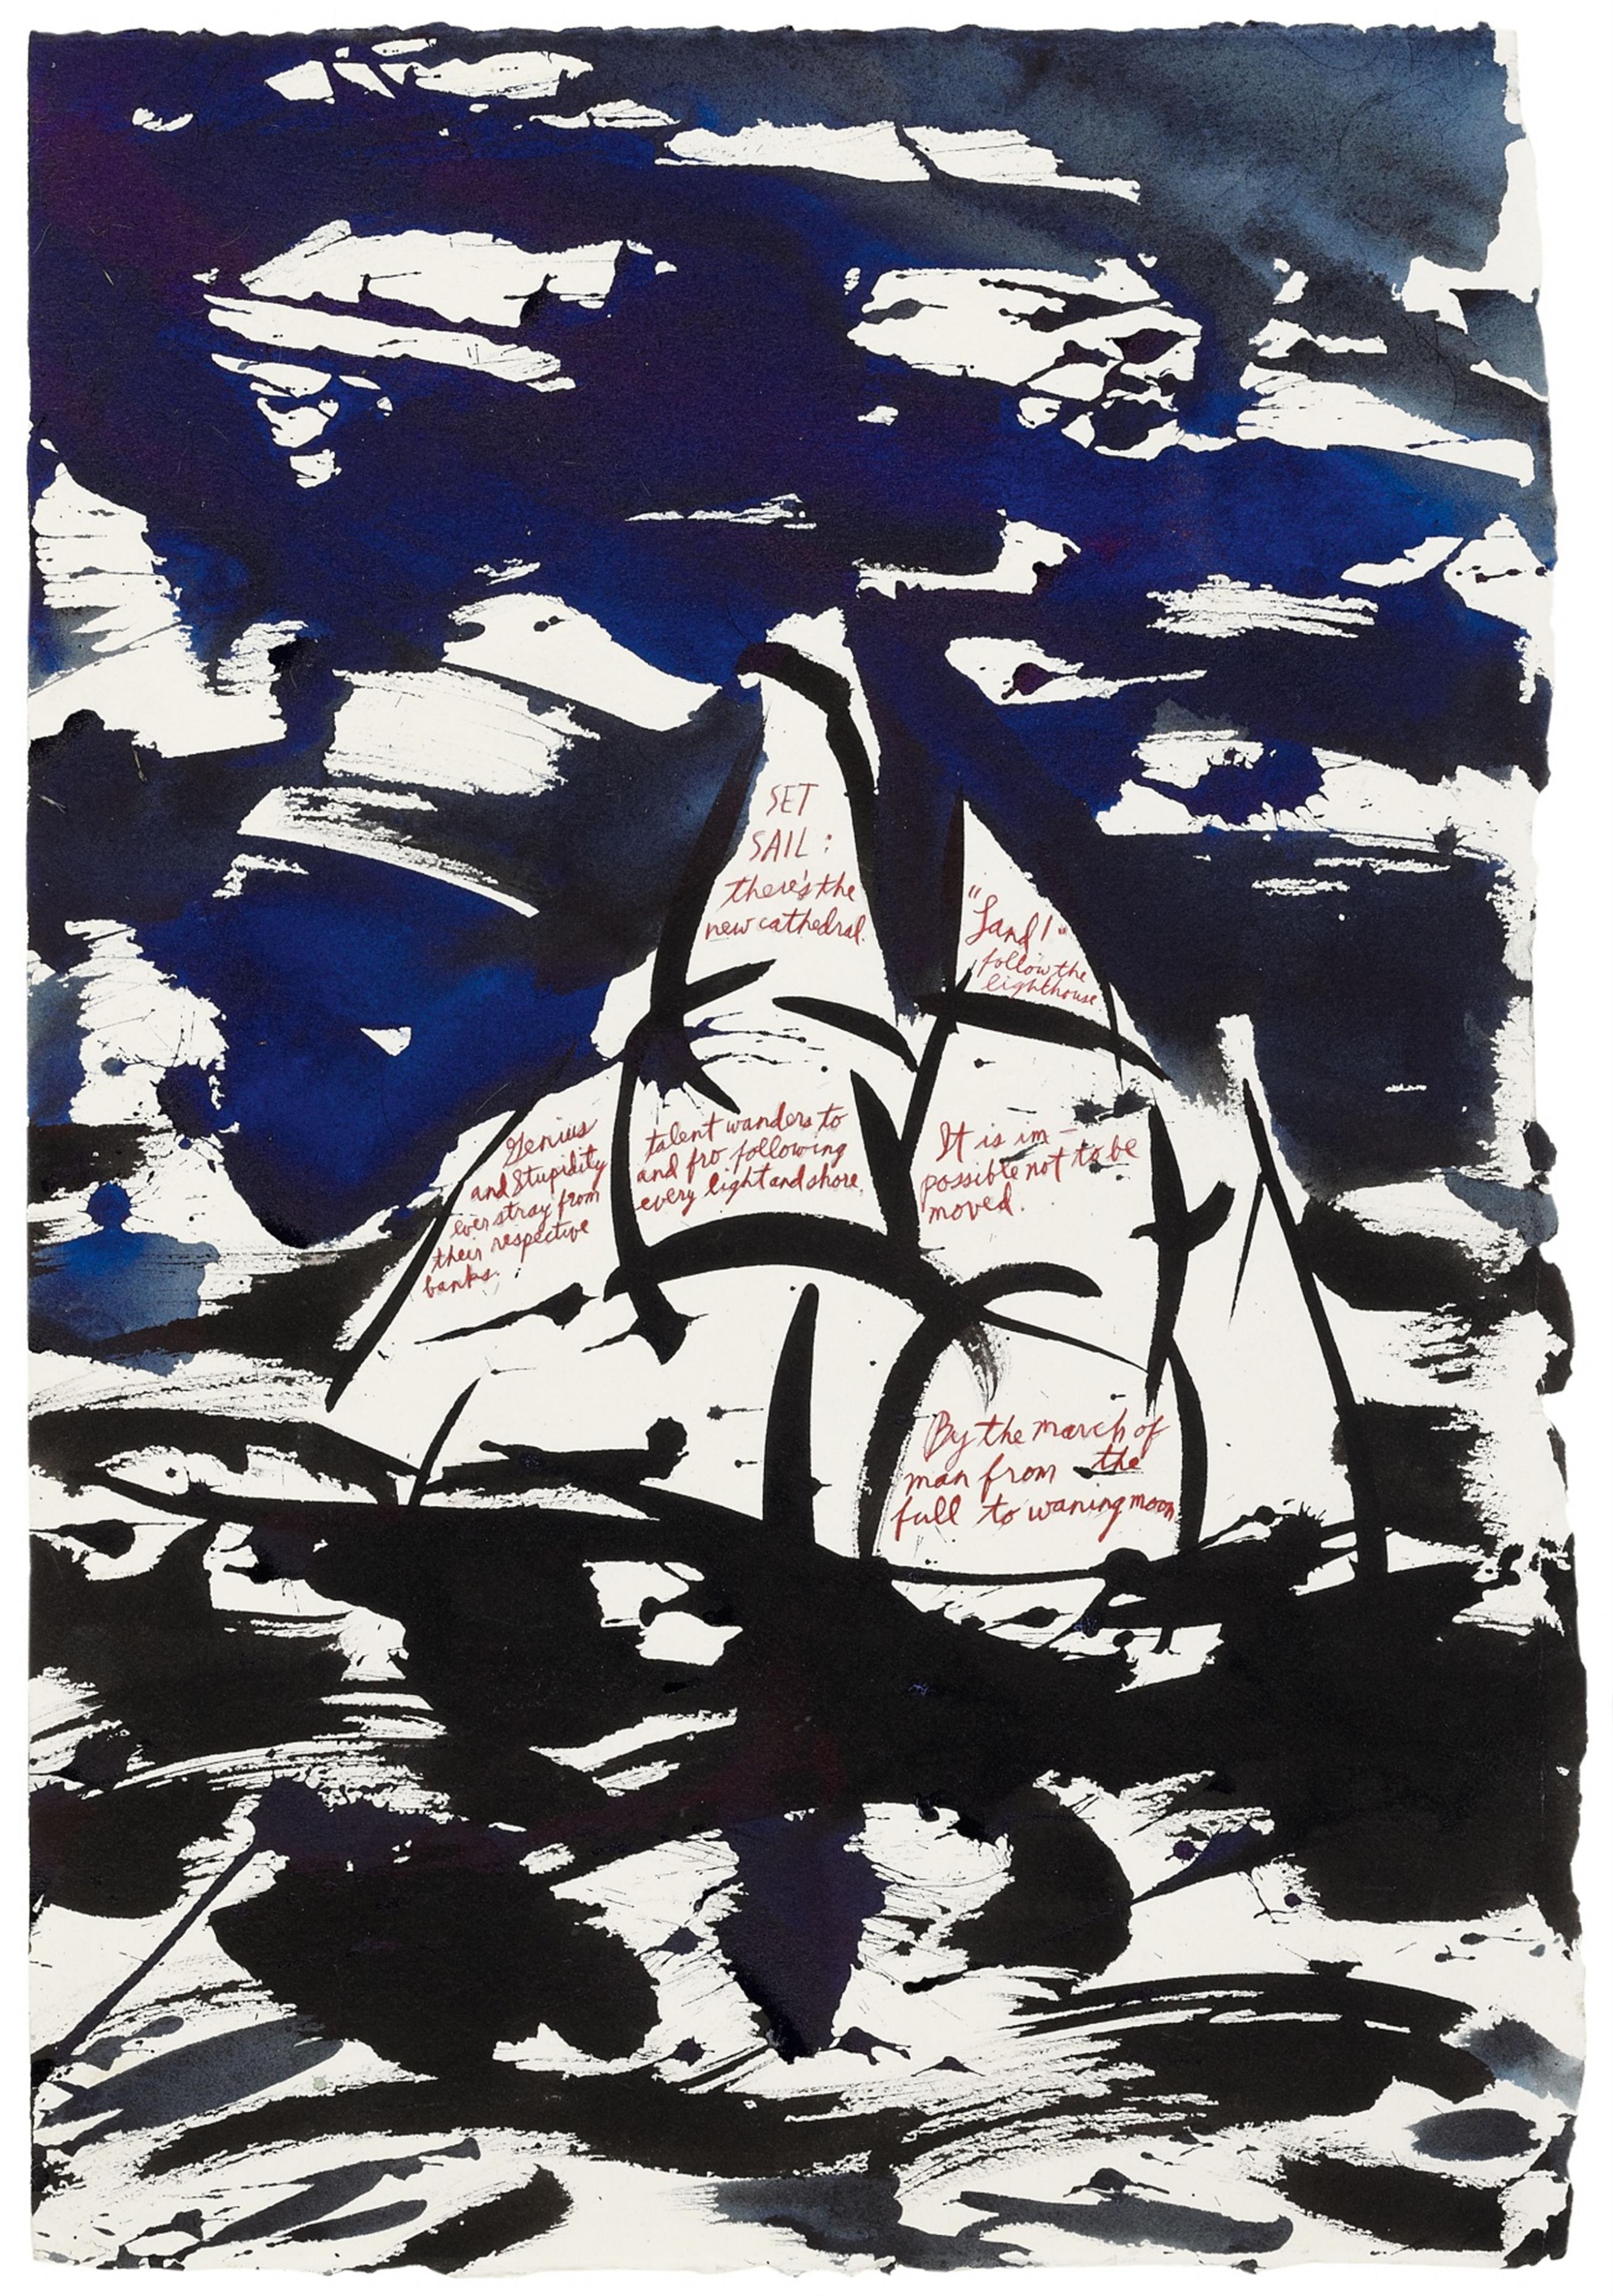 Raymond Pettibon - Untitled (Set Sail: there's the new cathedral) - image-1